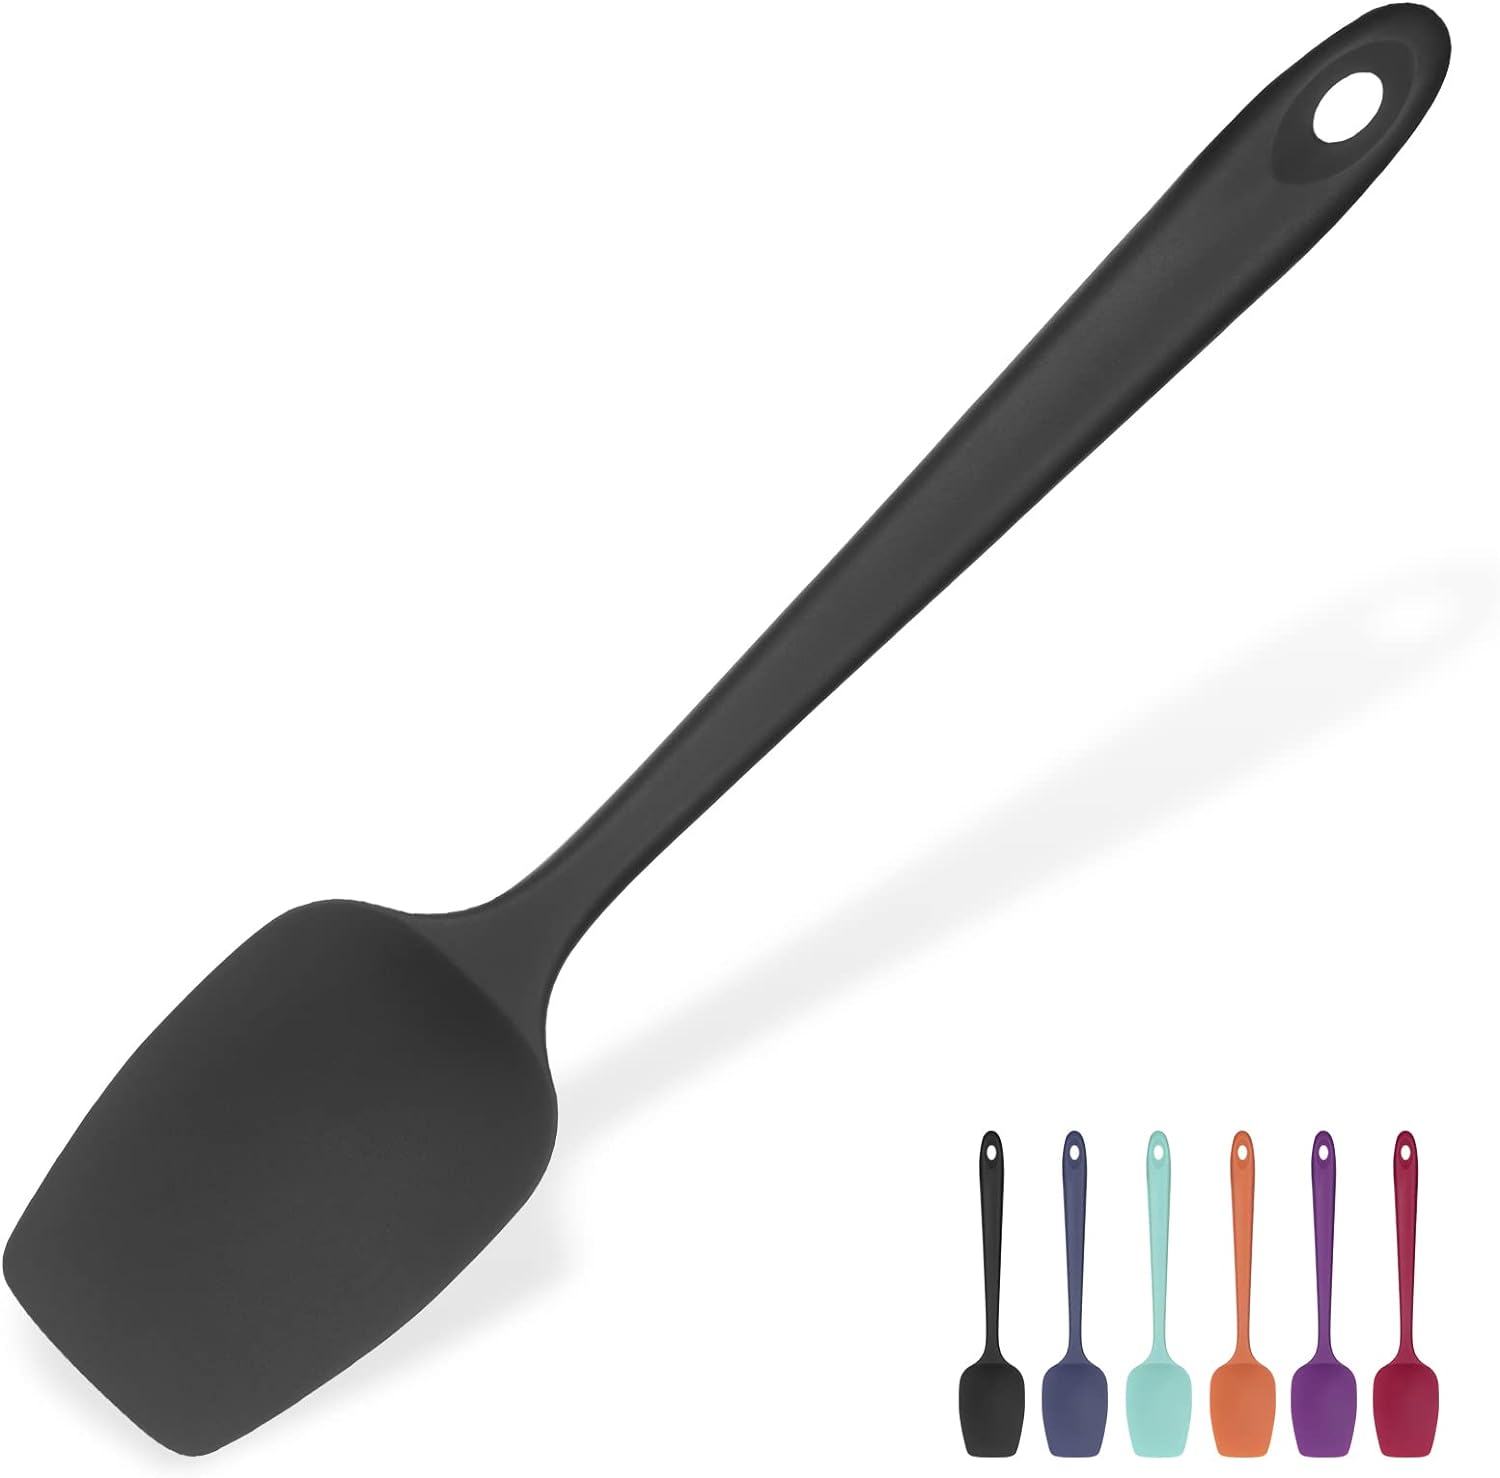 I have been on the search for a good spatula ever since my old one broke. ( the spatula head broke away from the handle and no matter how many times I tried to glue it back together it wouldnt hold). This spatula is perfect! It is all one piece( (yea)! No more breaking apart! It is easy to clean and although it says it is dishwasher safe, I haven't tried that yet. I love the color because it matches my mixer and I love the silicone feel. I gave it 5 stars for Heat Resistance but I have tried 